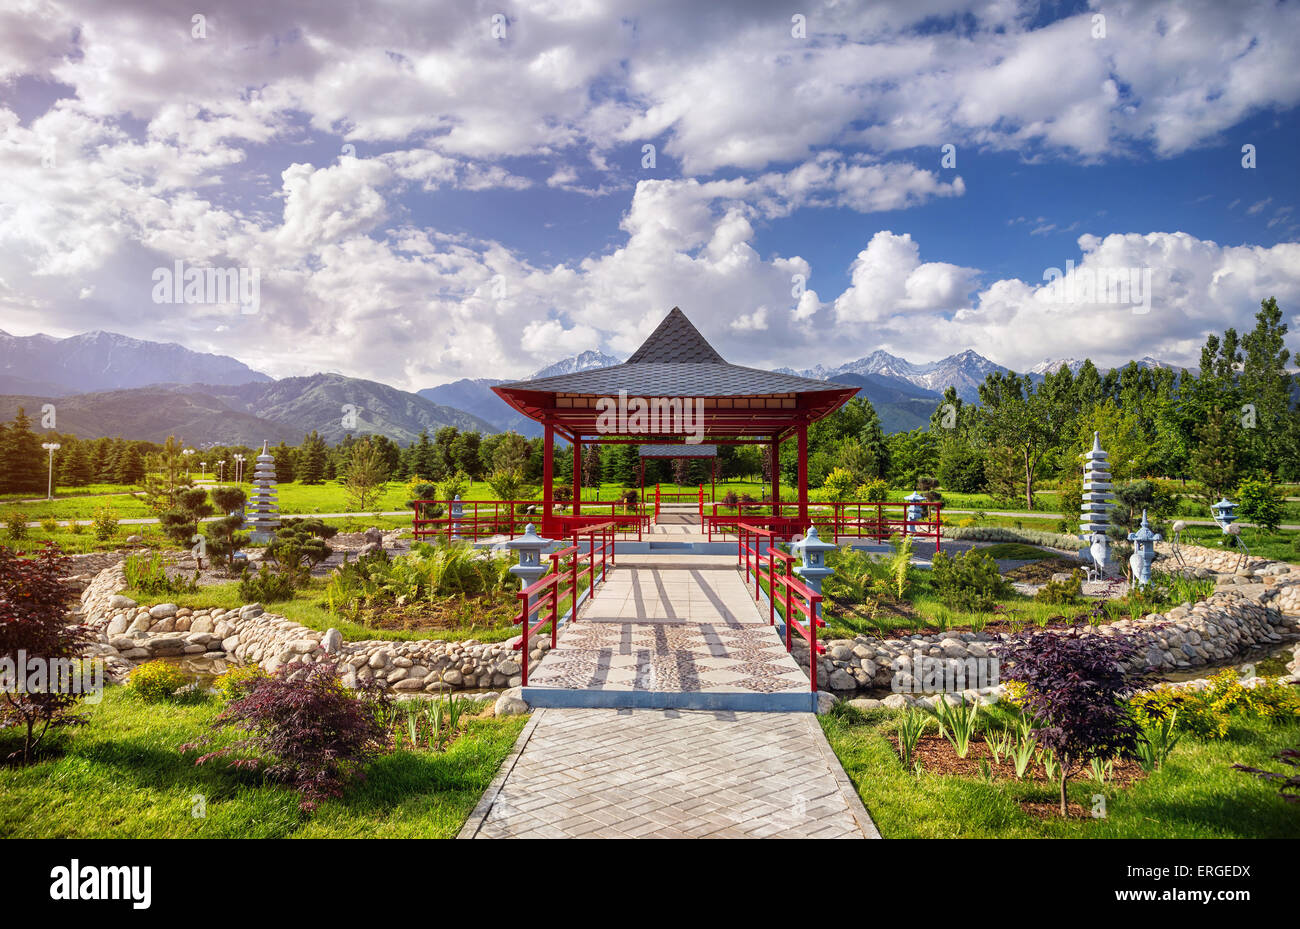 Japanese garden with red pagoda at mountains and blue sky in dendra park of first president in Almaty, Kazakhstan Stock Photo